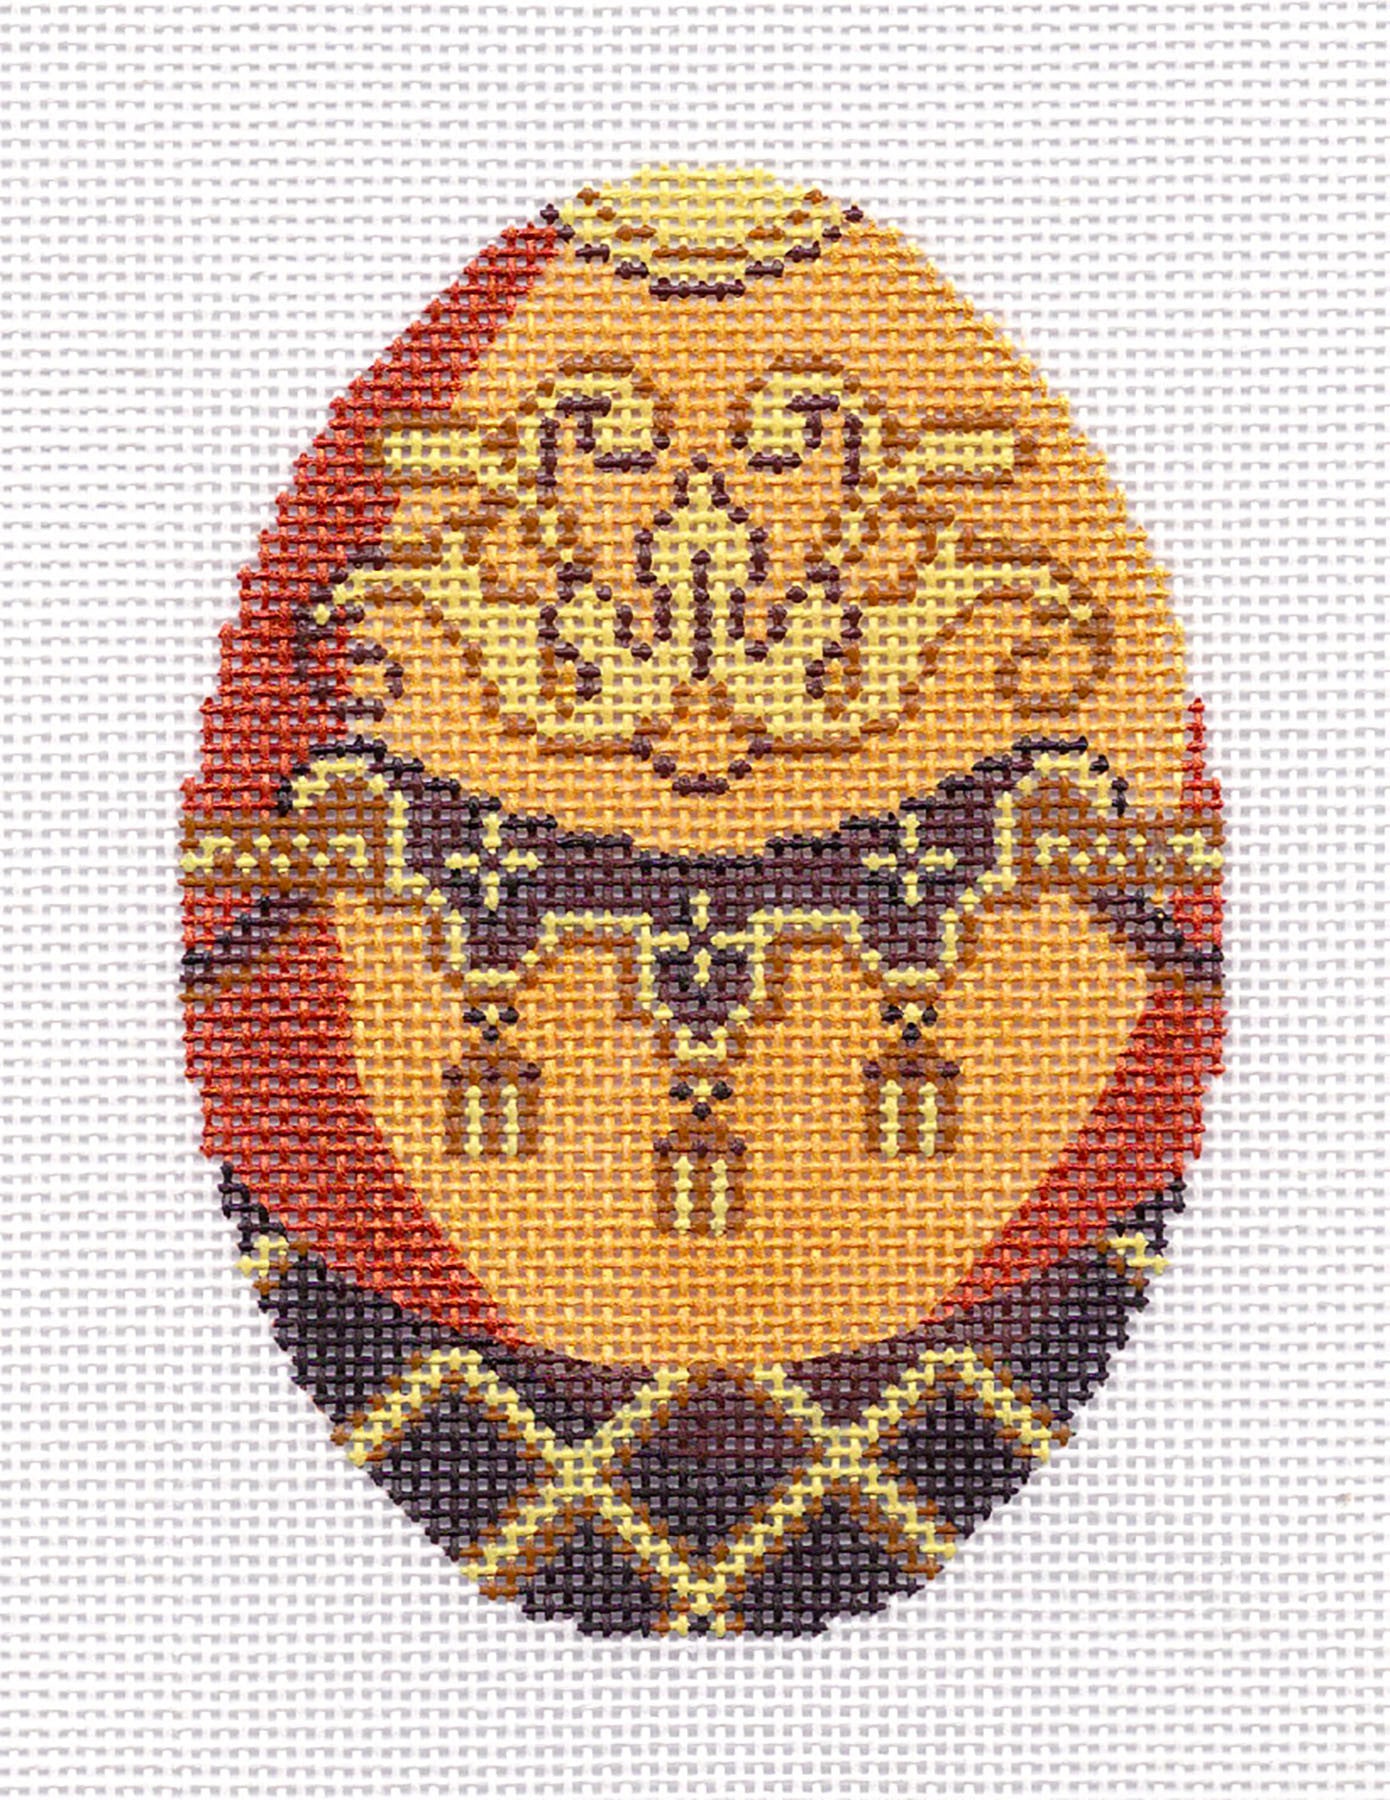 Faberge Egg ~ 3 Tassels Jeweled Egg handpainted Needlepoint Canvas Ornament by LEE